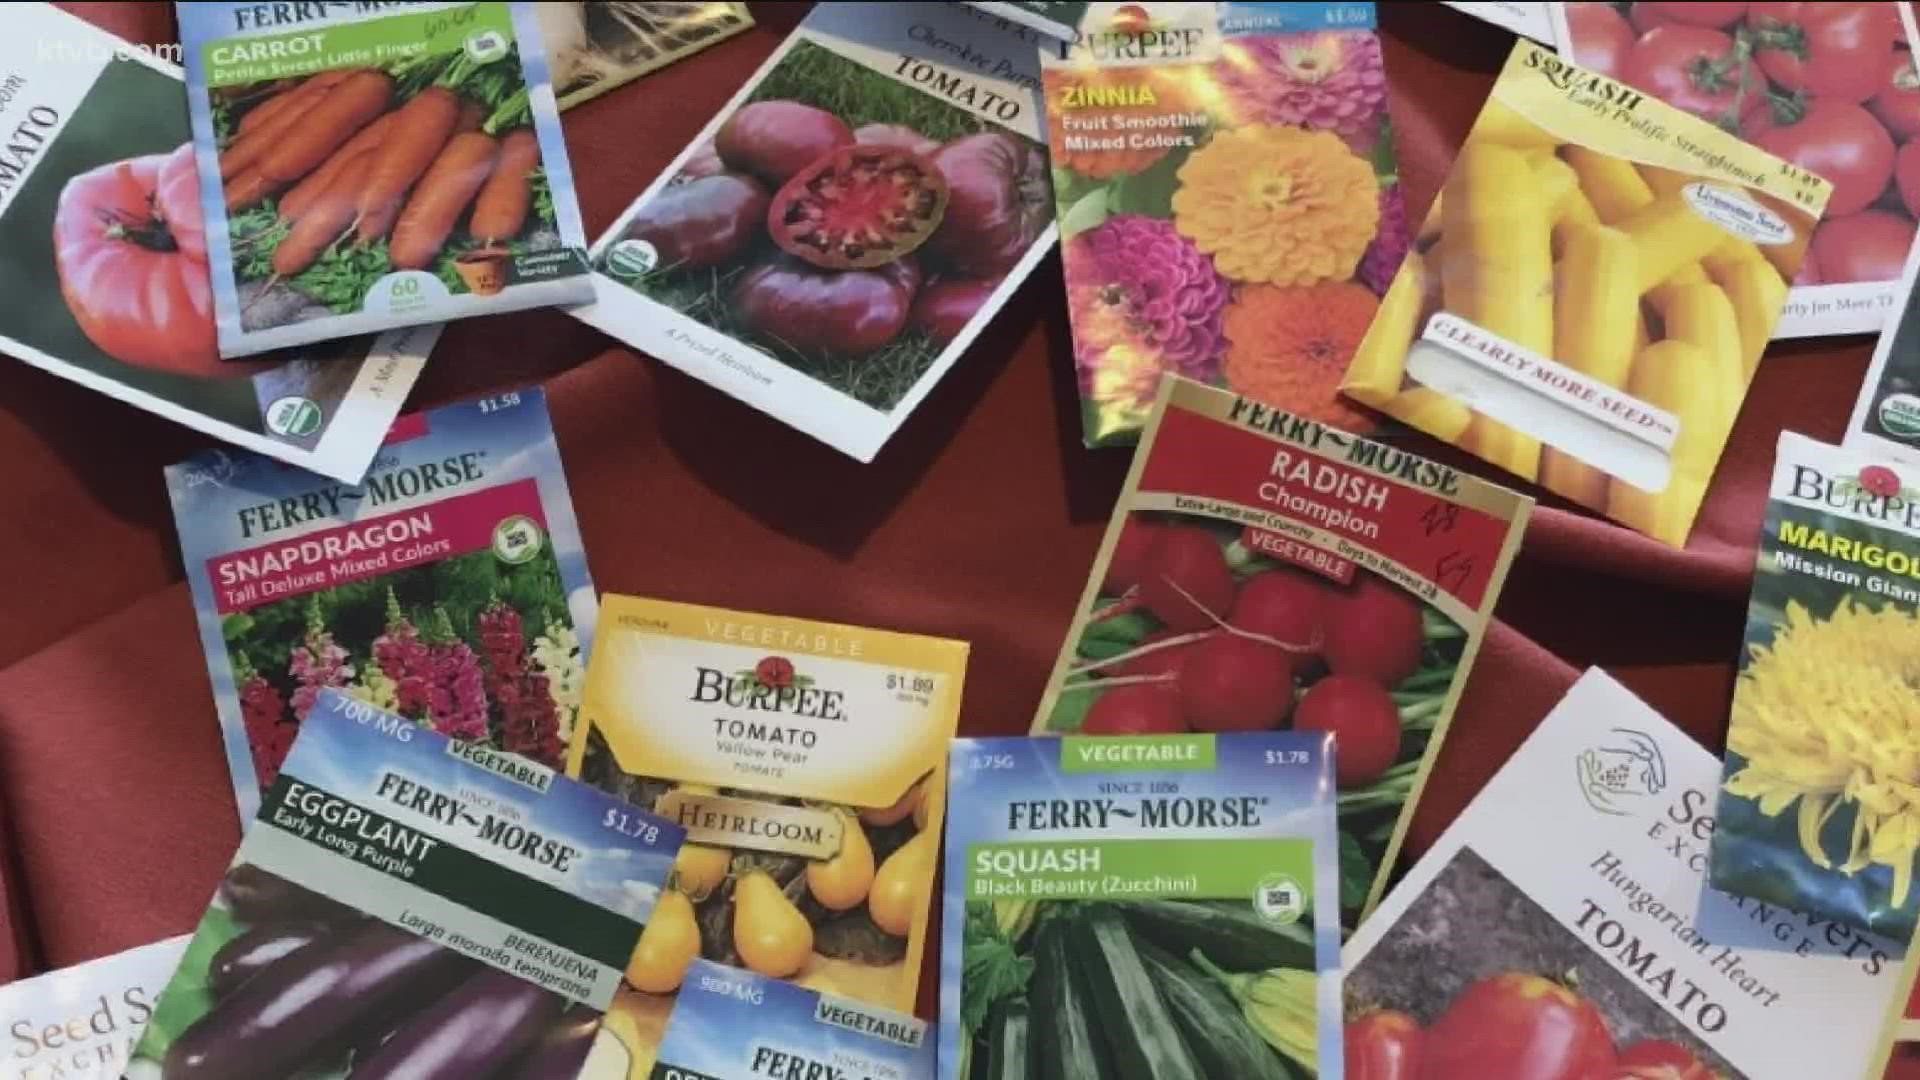 You can find a variety of fresh seeds, bulbs, and container plants at local garden stores, nurseries, and online, but some gardeners save seeds from the last year.